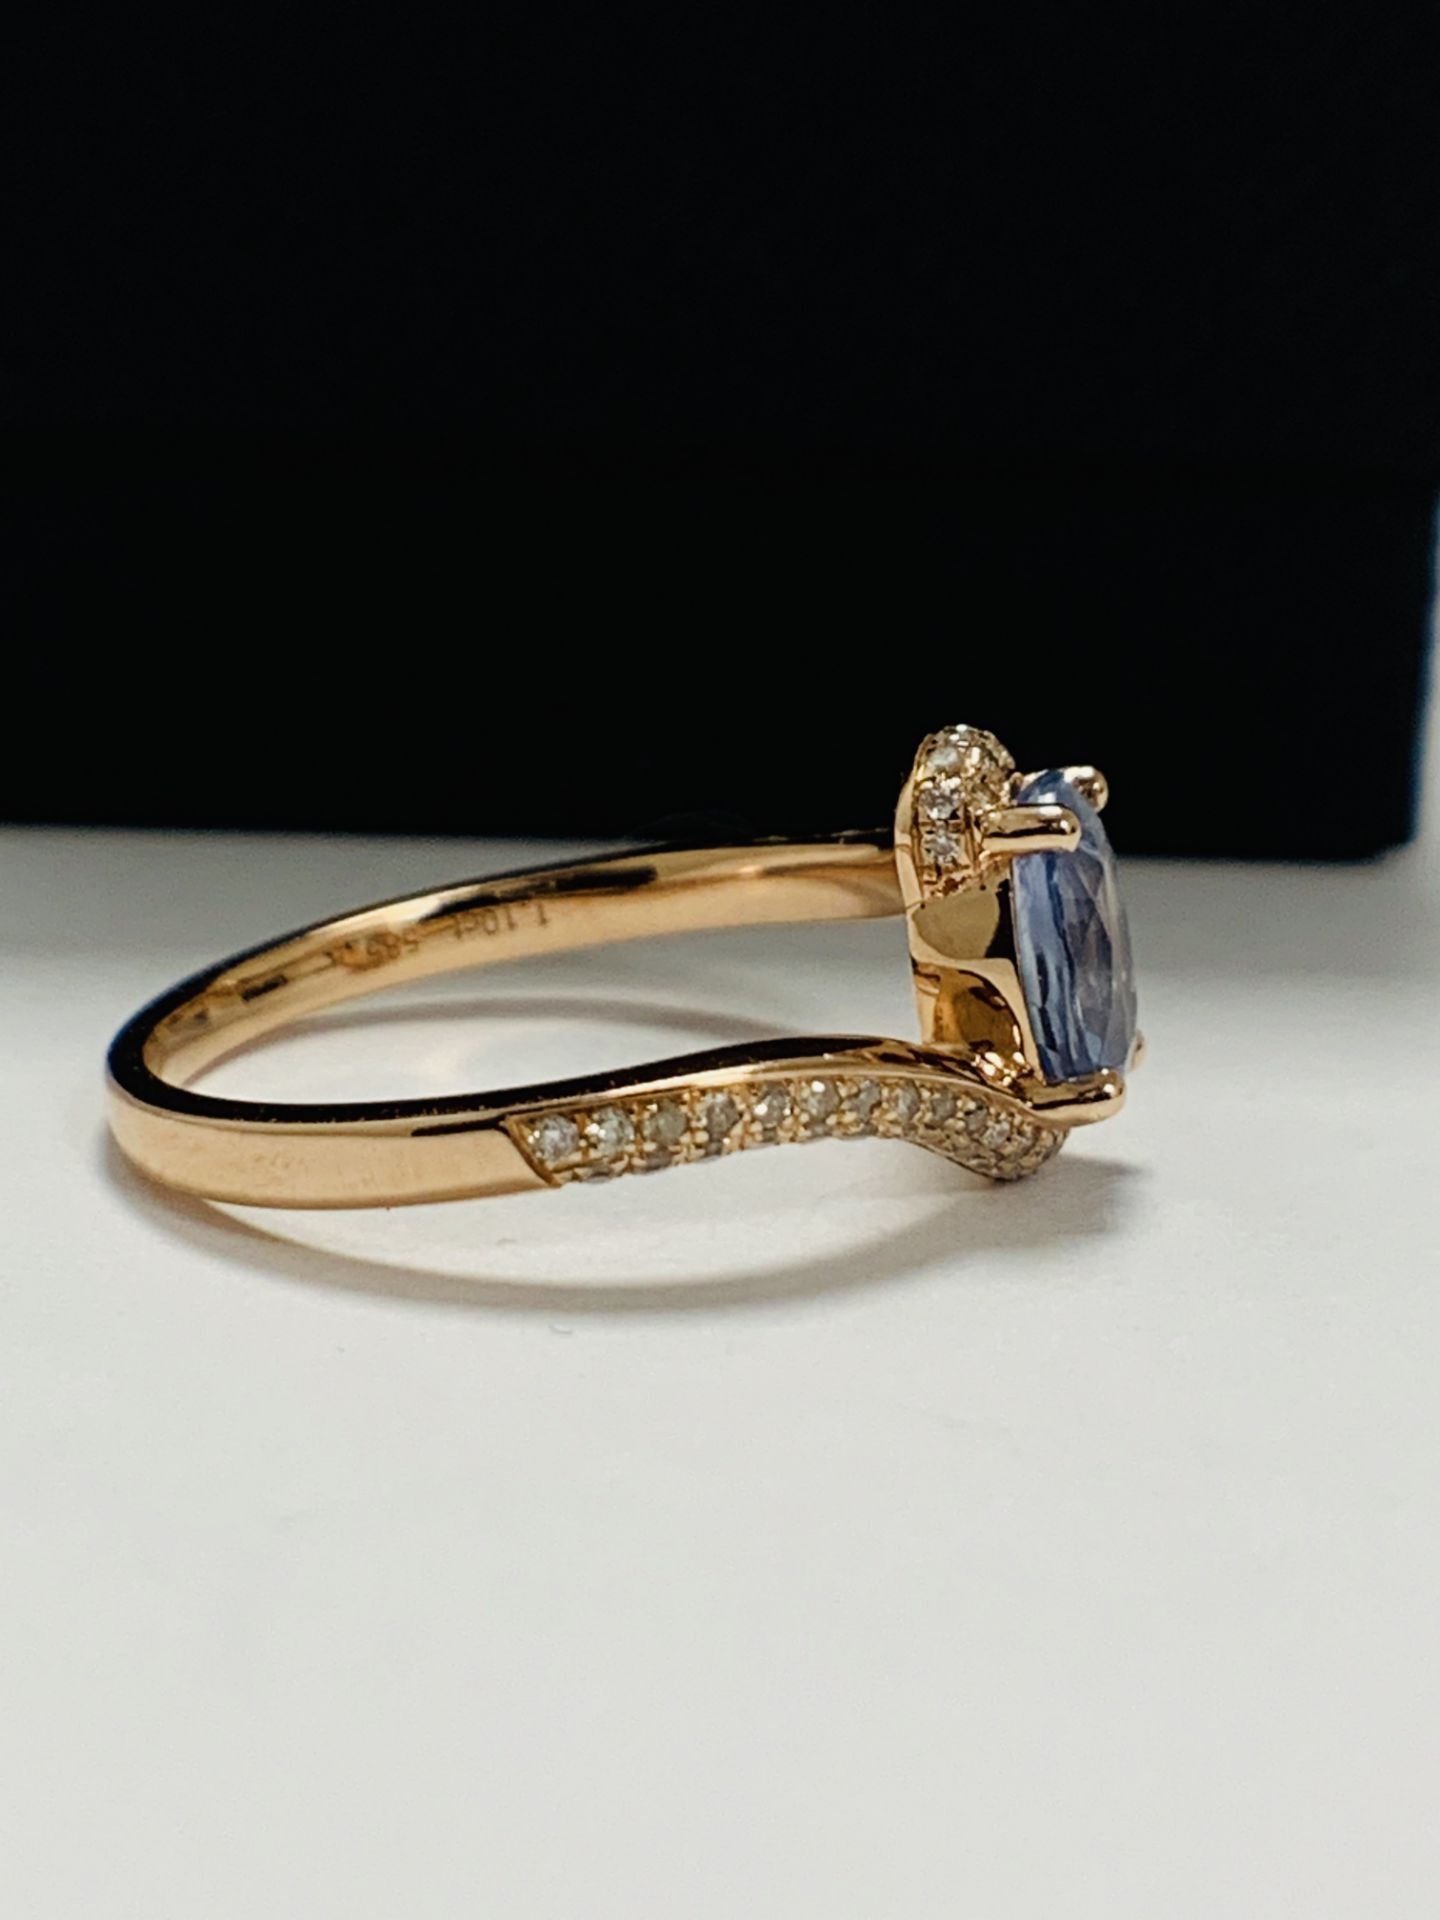 14ct Rose Gold Sapphire and Diamond Ring - Image 8 of 13